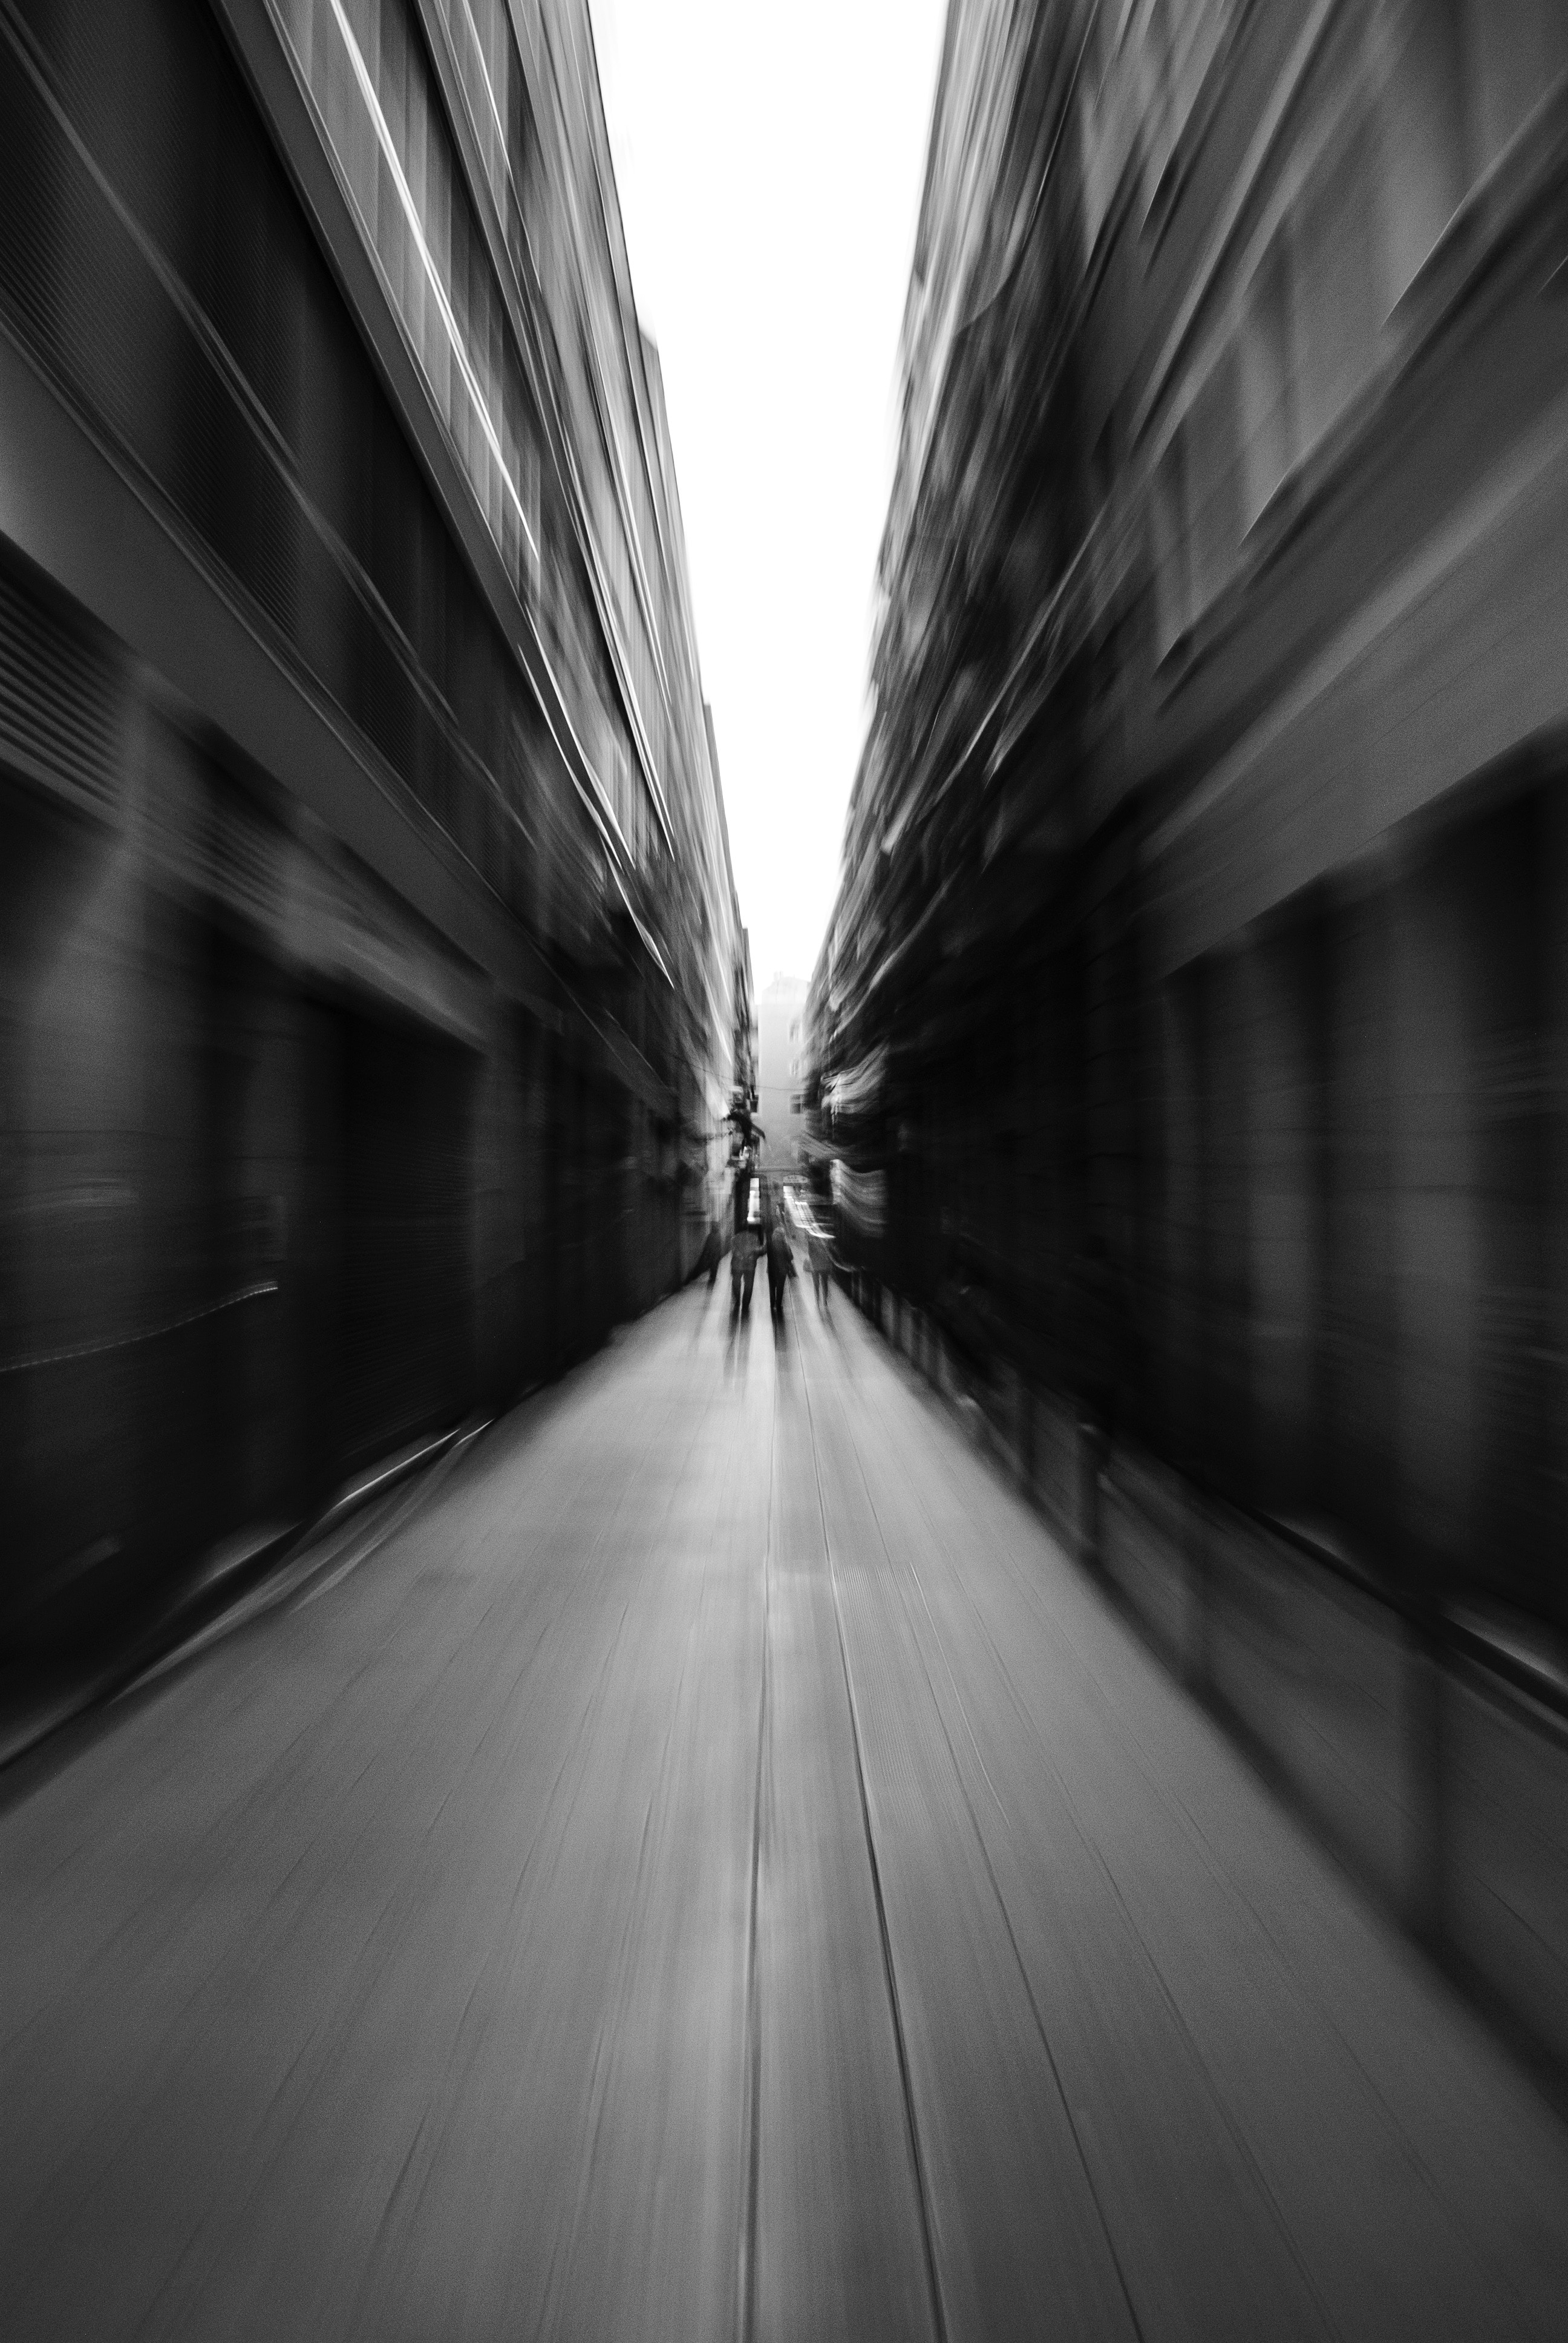 chb, blur, perspective, building, miscellanea, miscellaneous, traffic, movement, smooth, bw, street, prospect 2160p